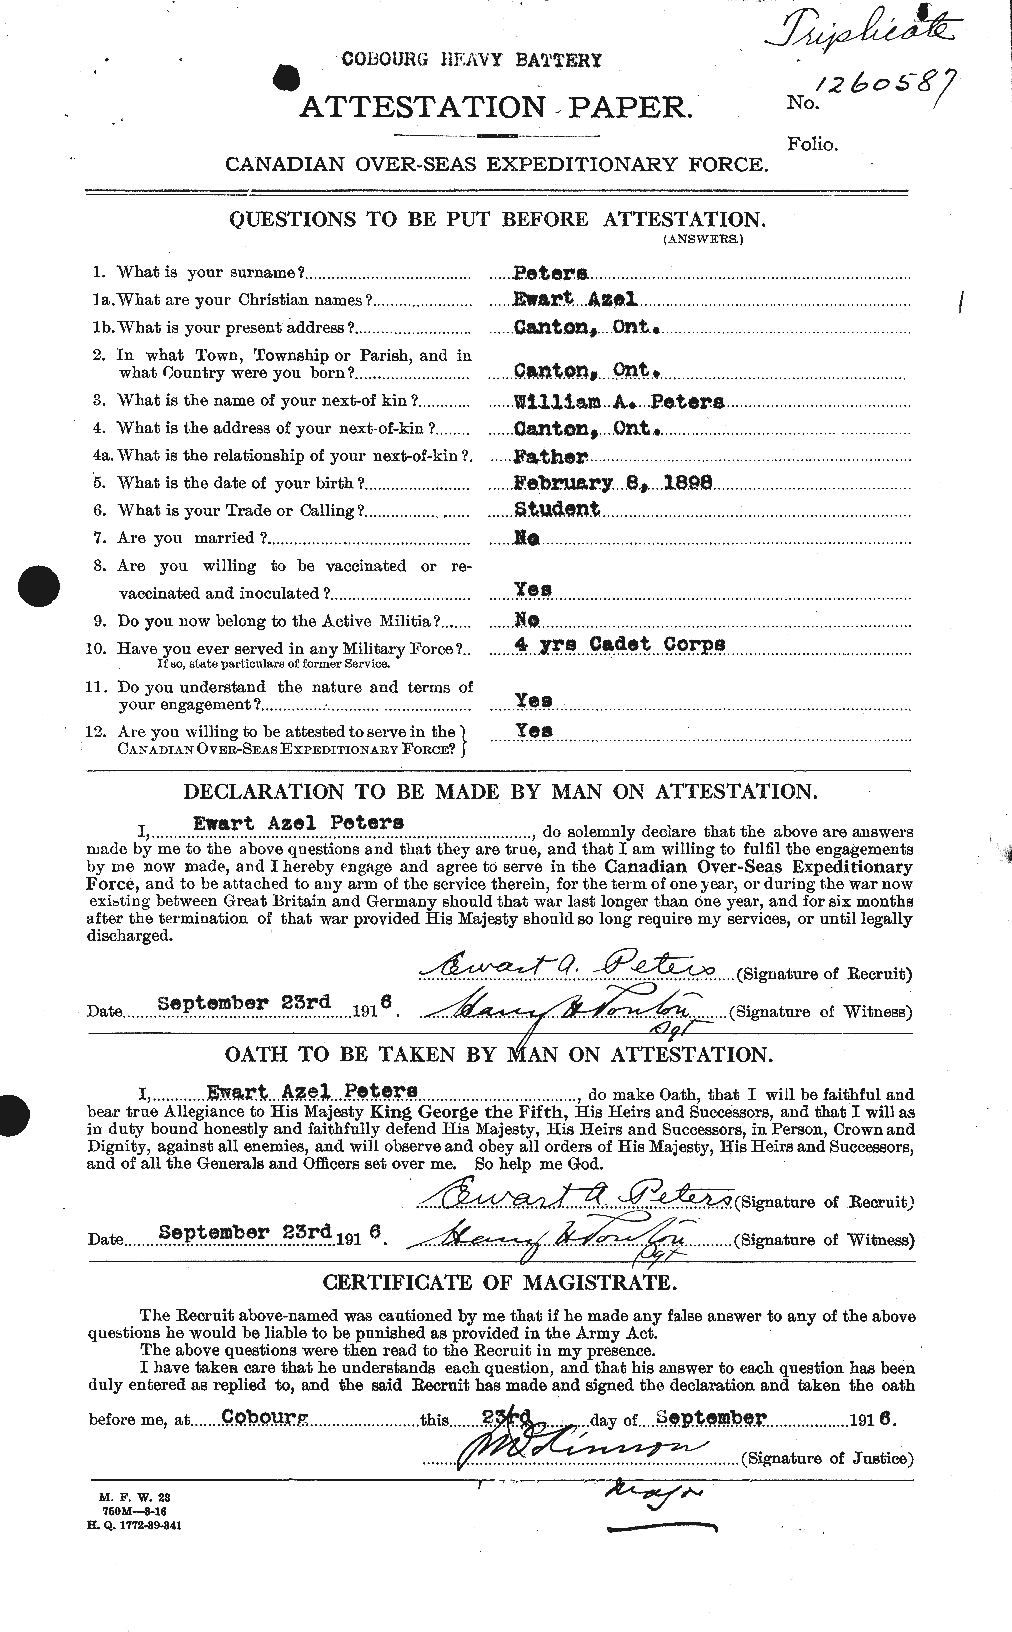 Personnel Records of the First World War - CEF 575422a